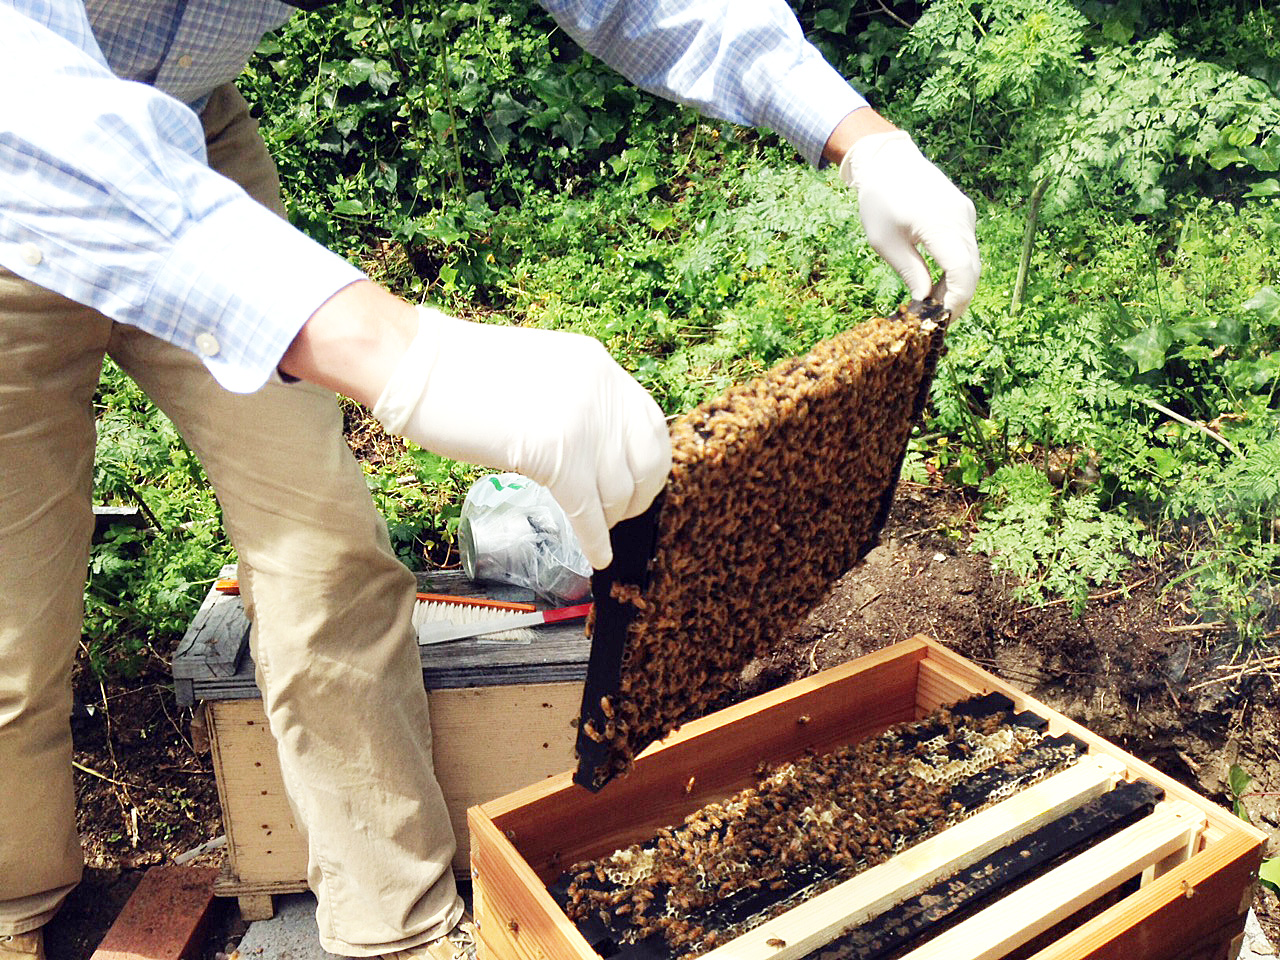 A beekeeper examining a frame from a bee hive